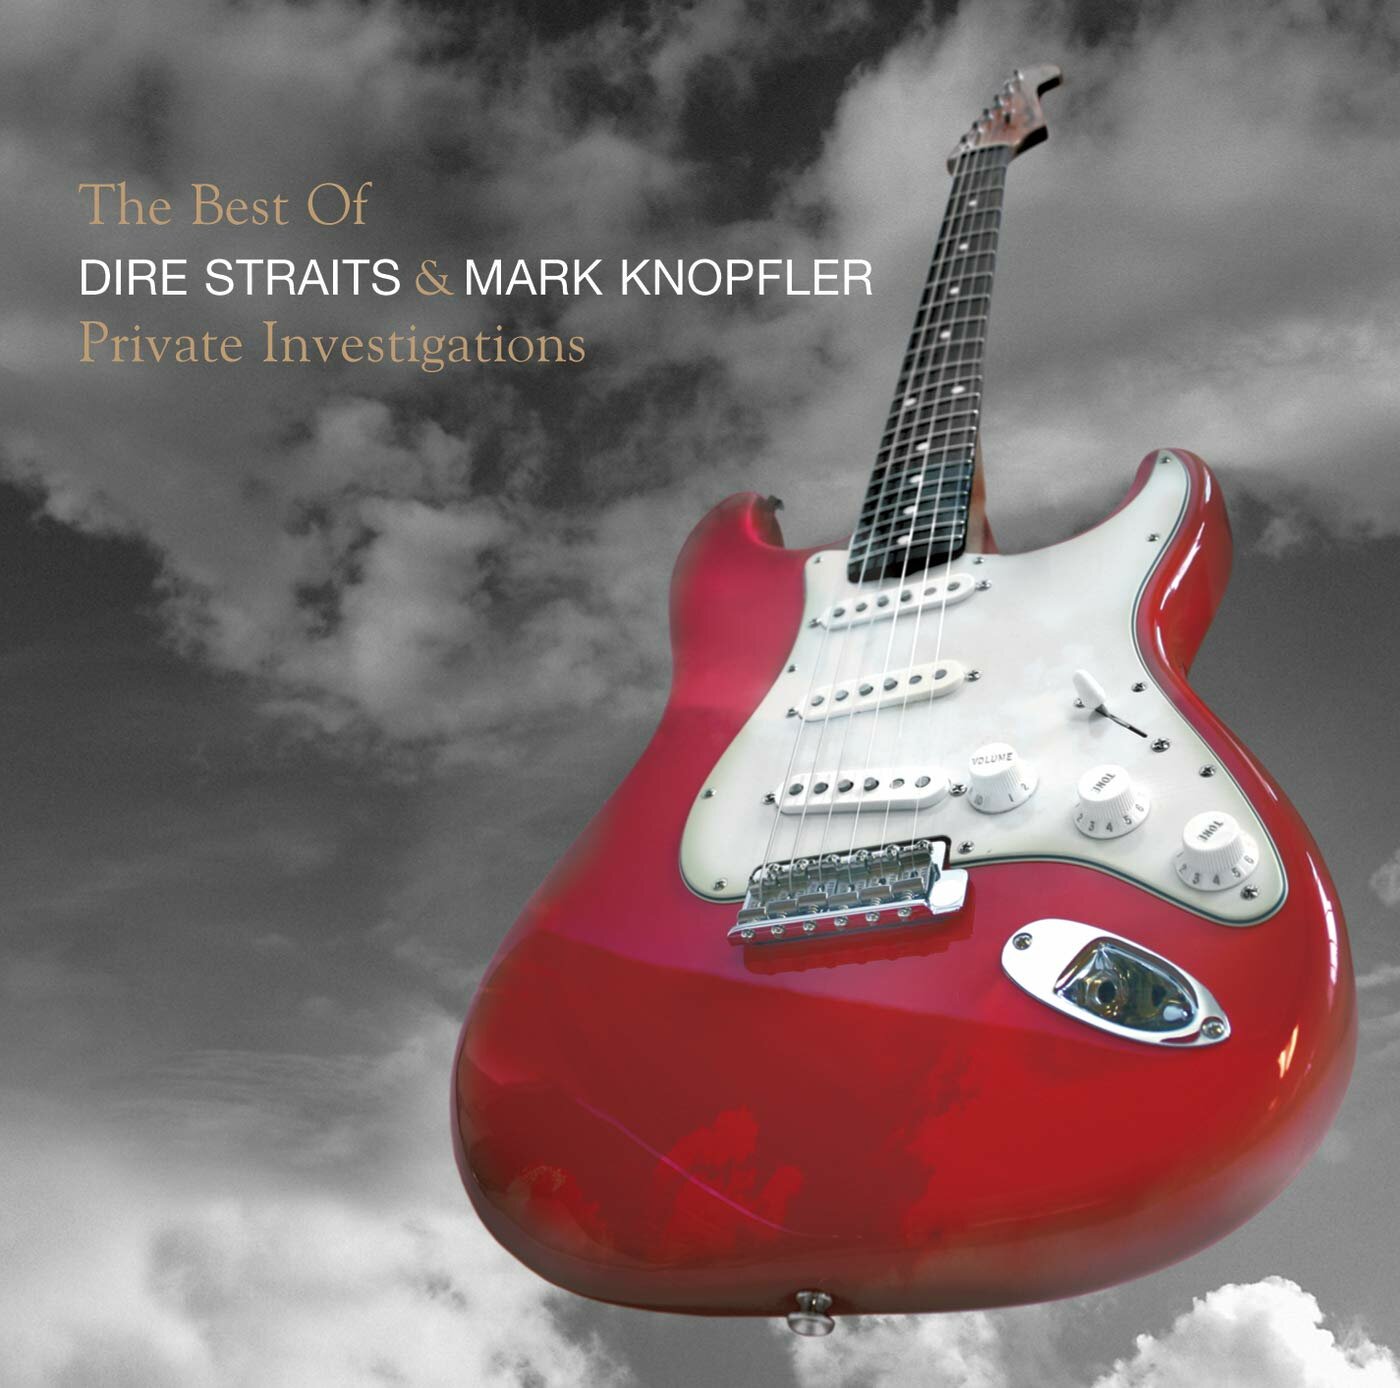 Audio CD Dire Straits and Mark Knopfler. The Best Of. Private Investigations (CD)